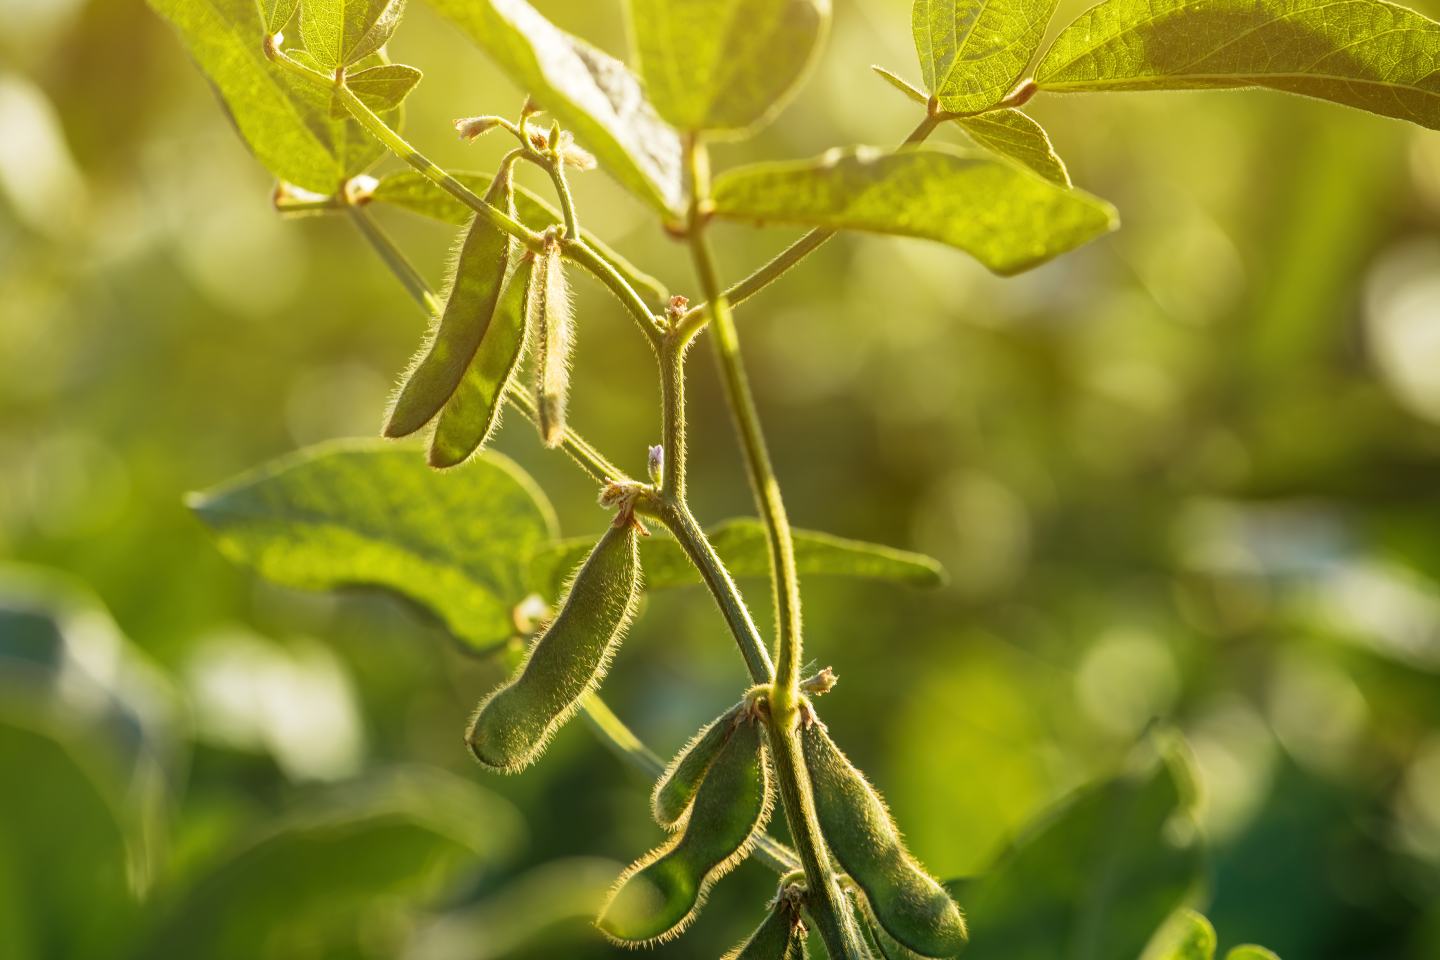 Soybeans, innovation, crop protection, sustainability, agriculture.